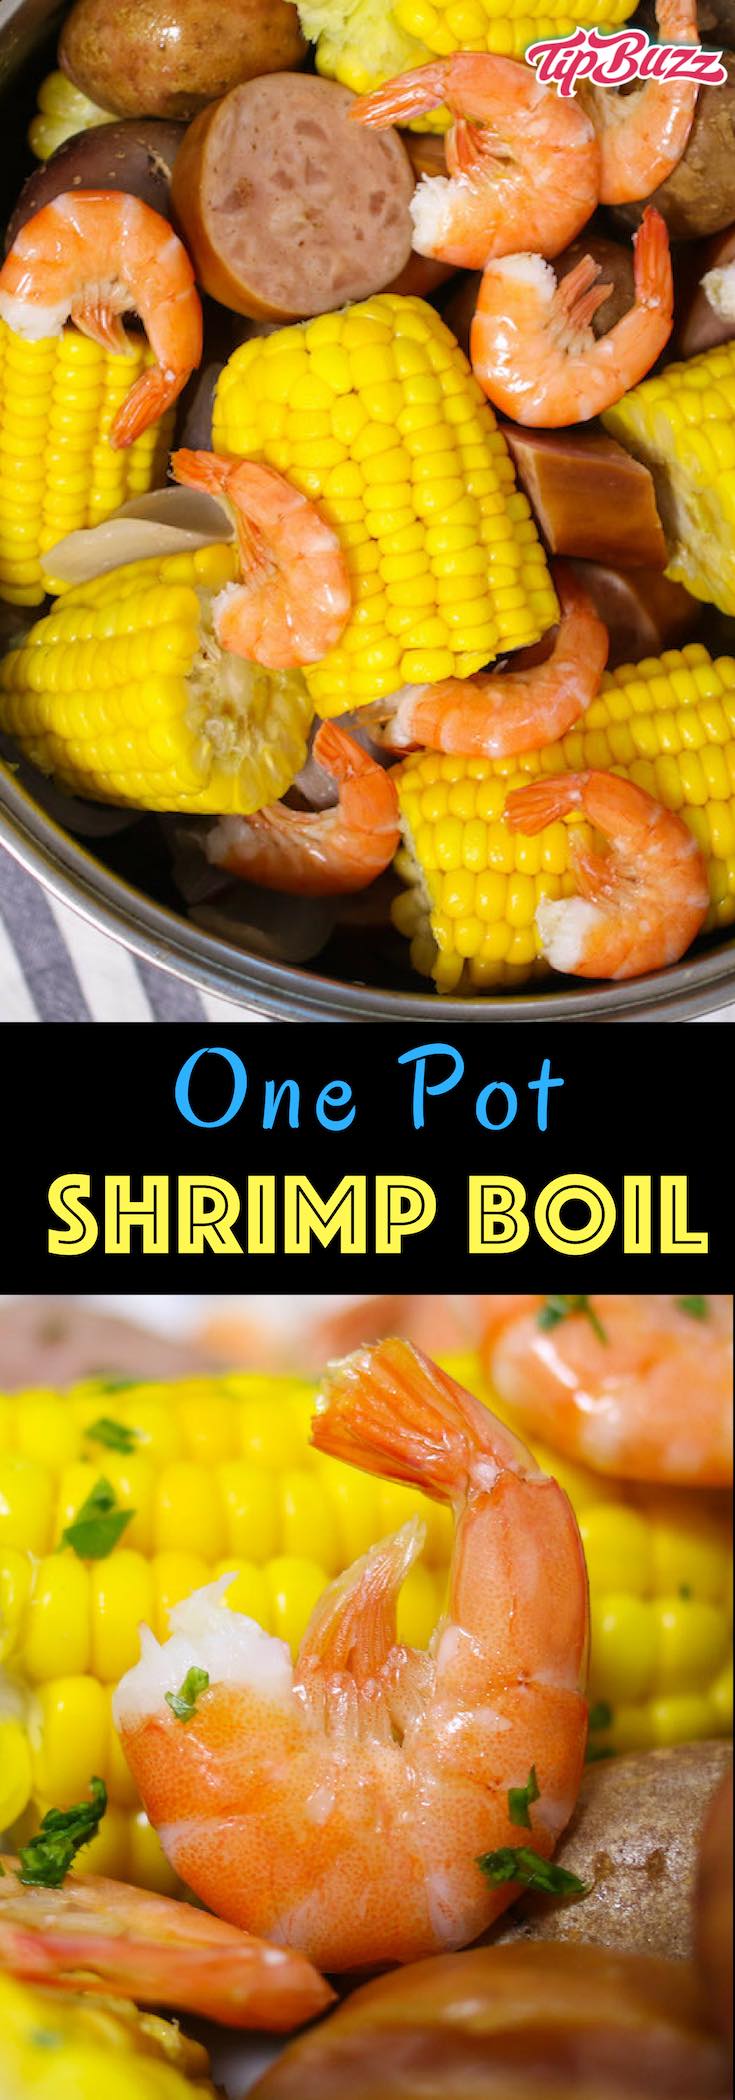 Shrimp Boil is an easy and flavorful southern feast to feed a crowd! Shrimp is boiled with potatoes, corn, smoked sausage, onion and seasonings